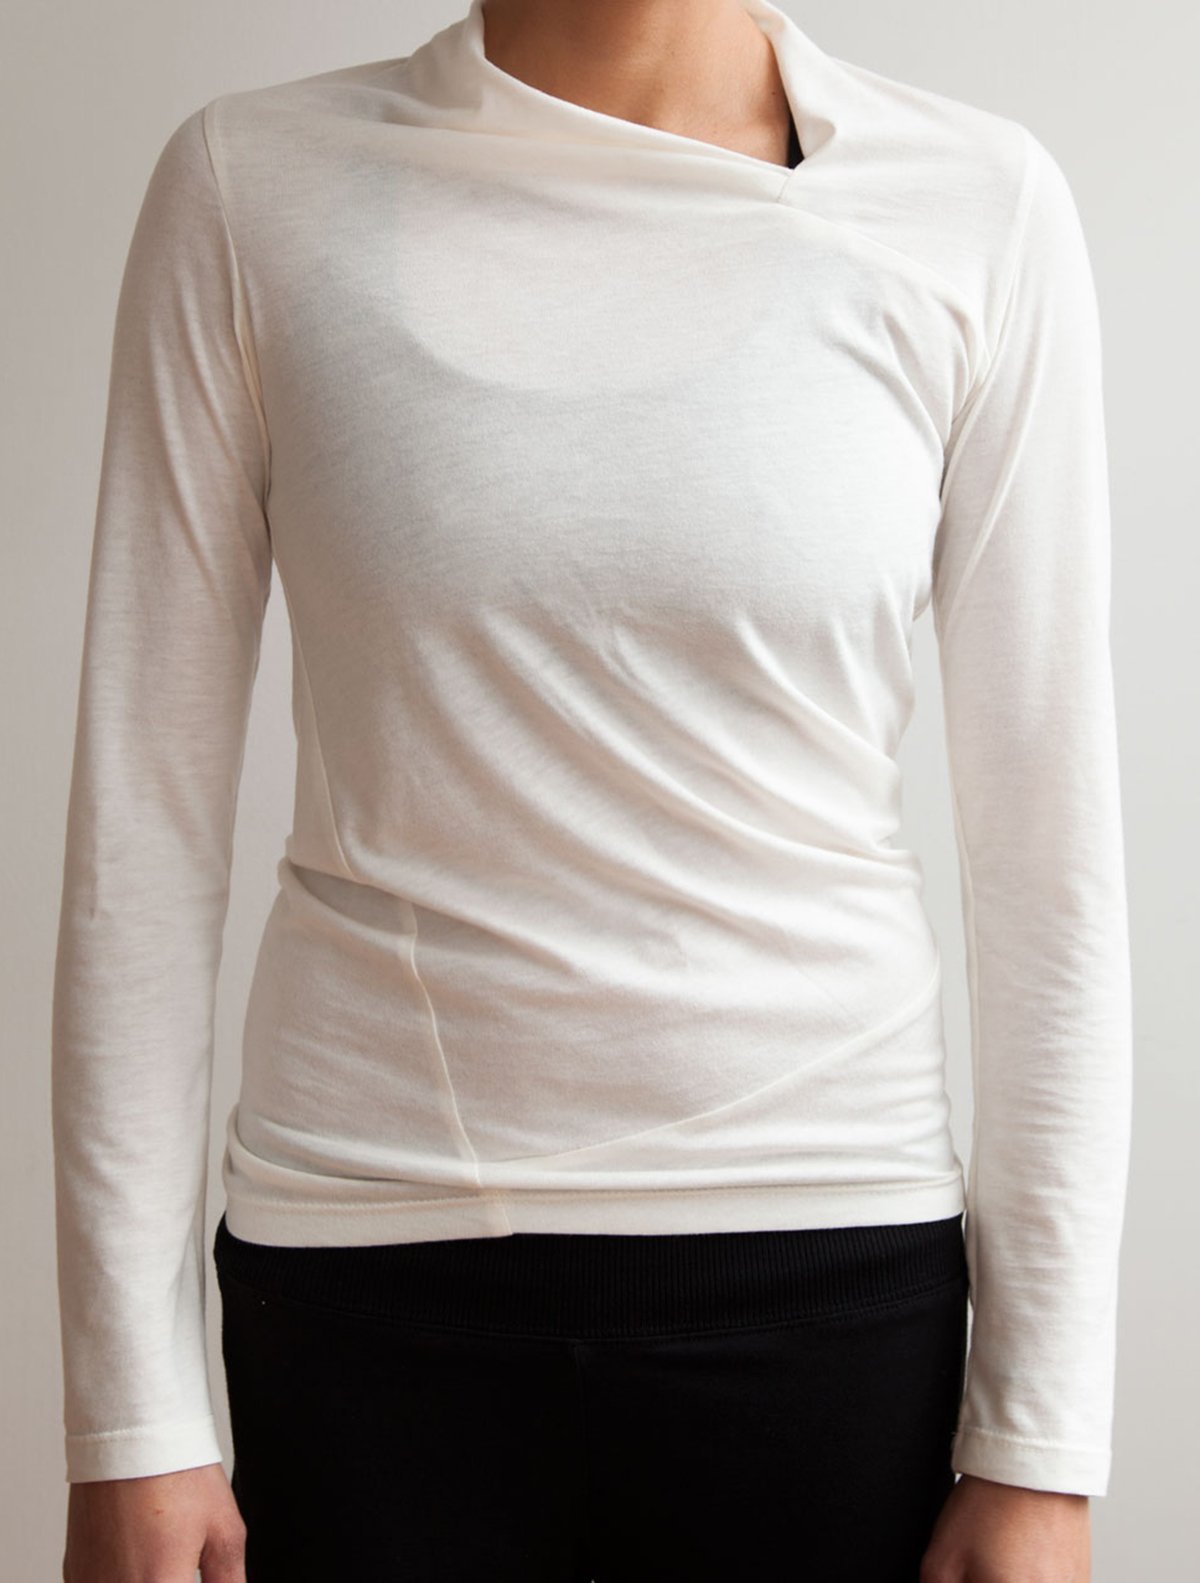 front view of model wearing simulacra's white Long Sleeve Twist Top 